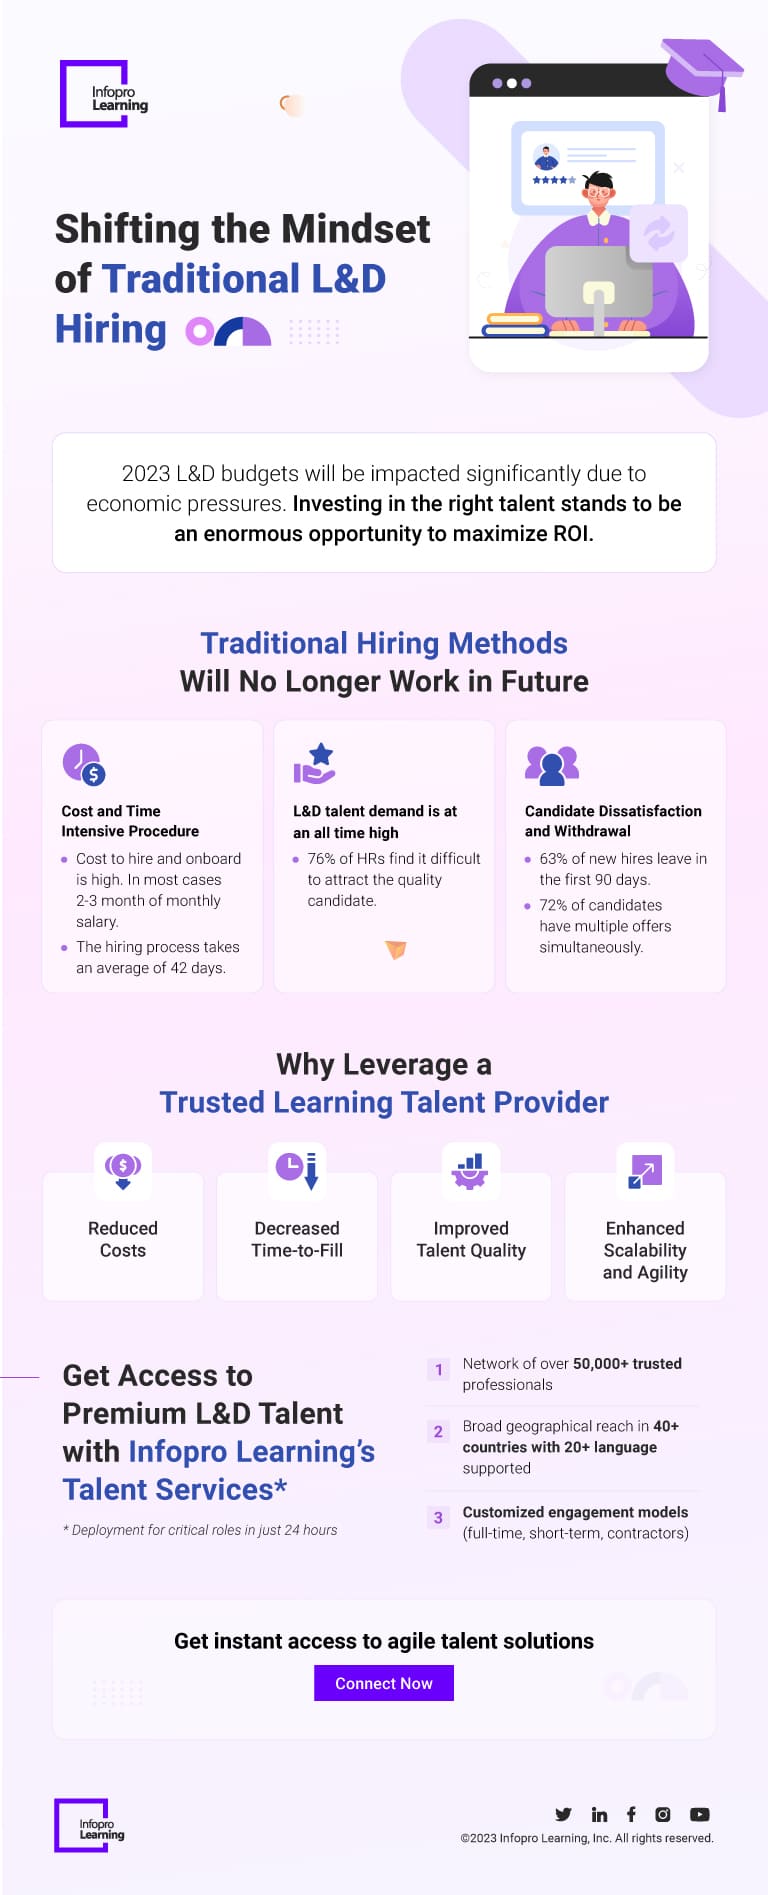 5 Key Learning Talent Trends to Watch Out in 2023